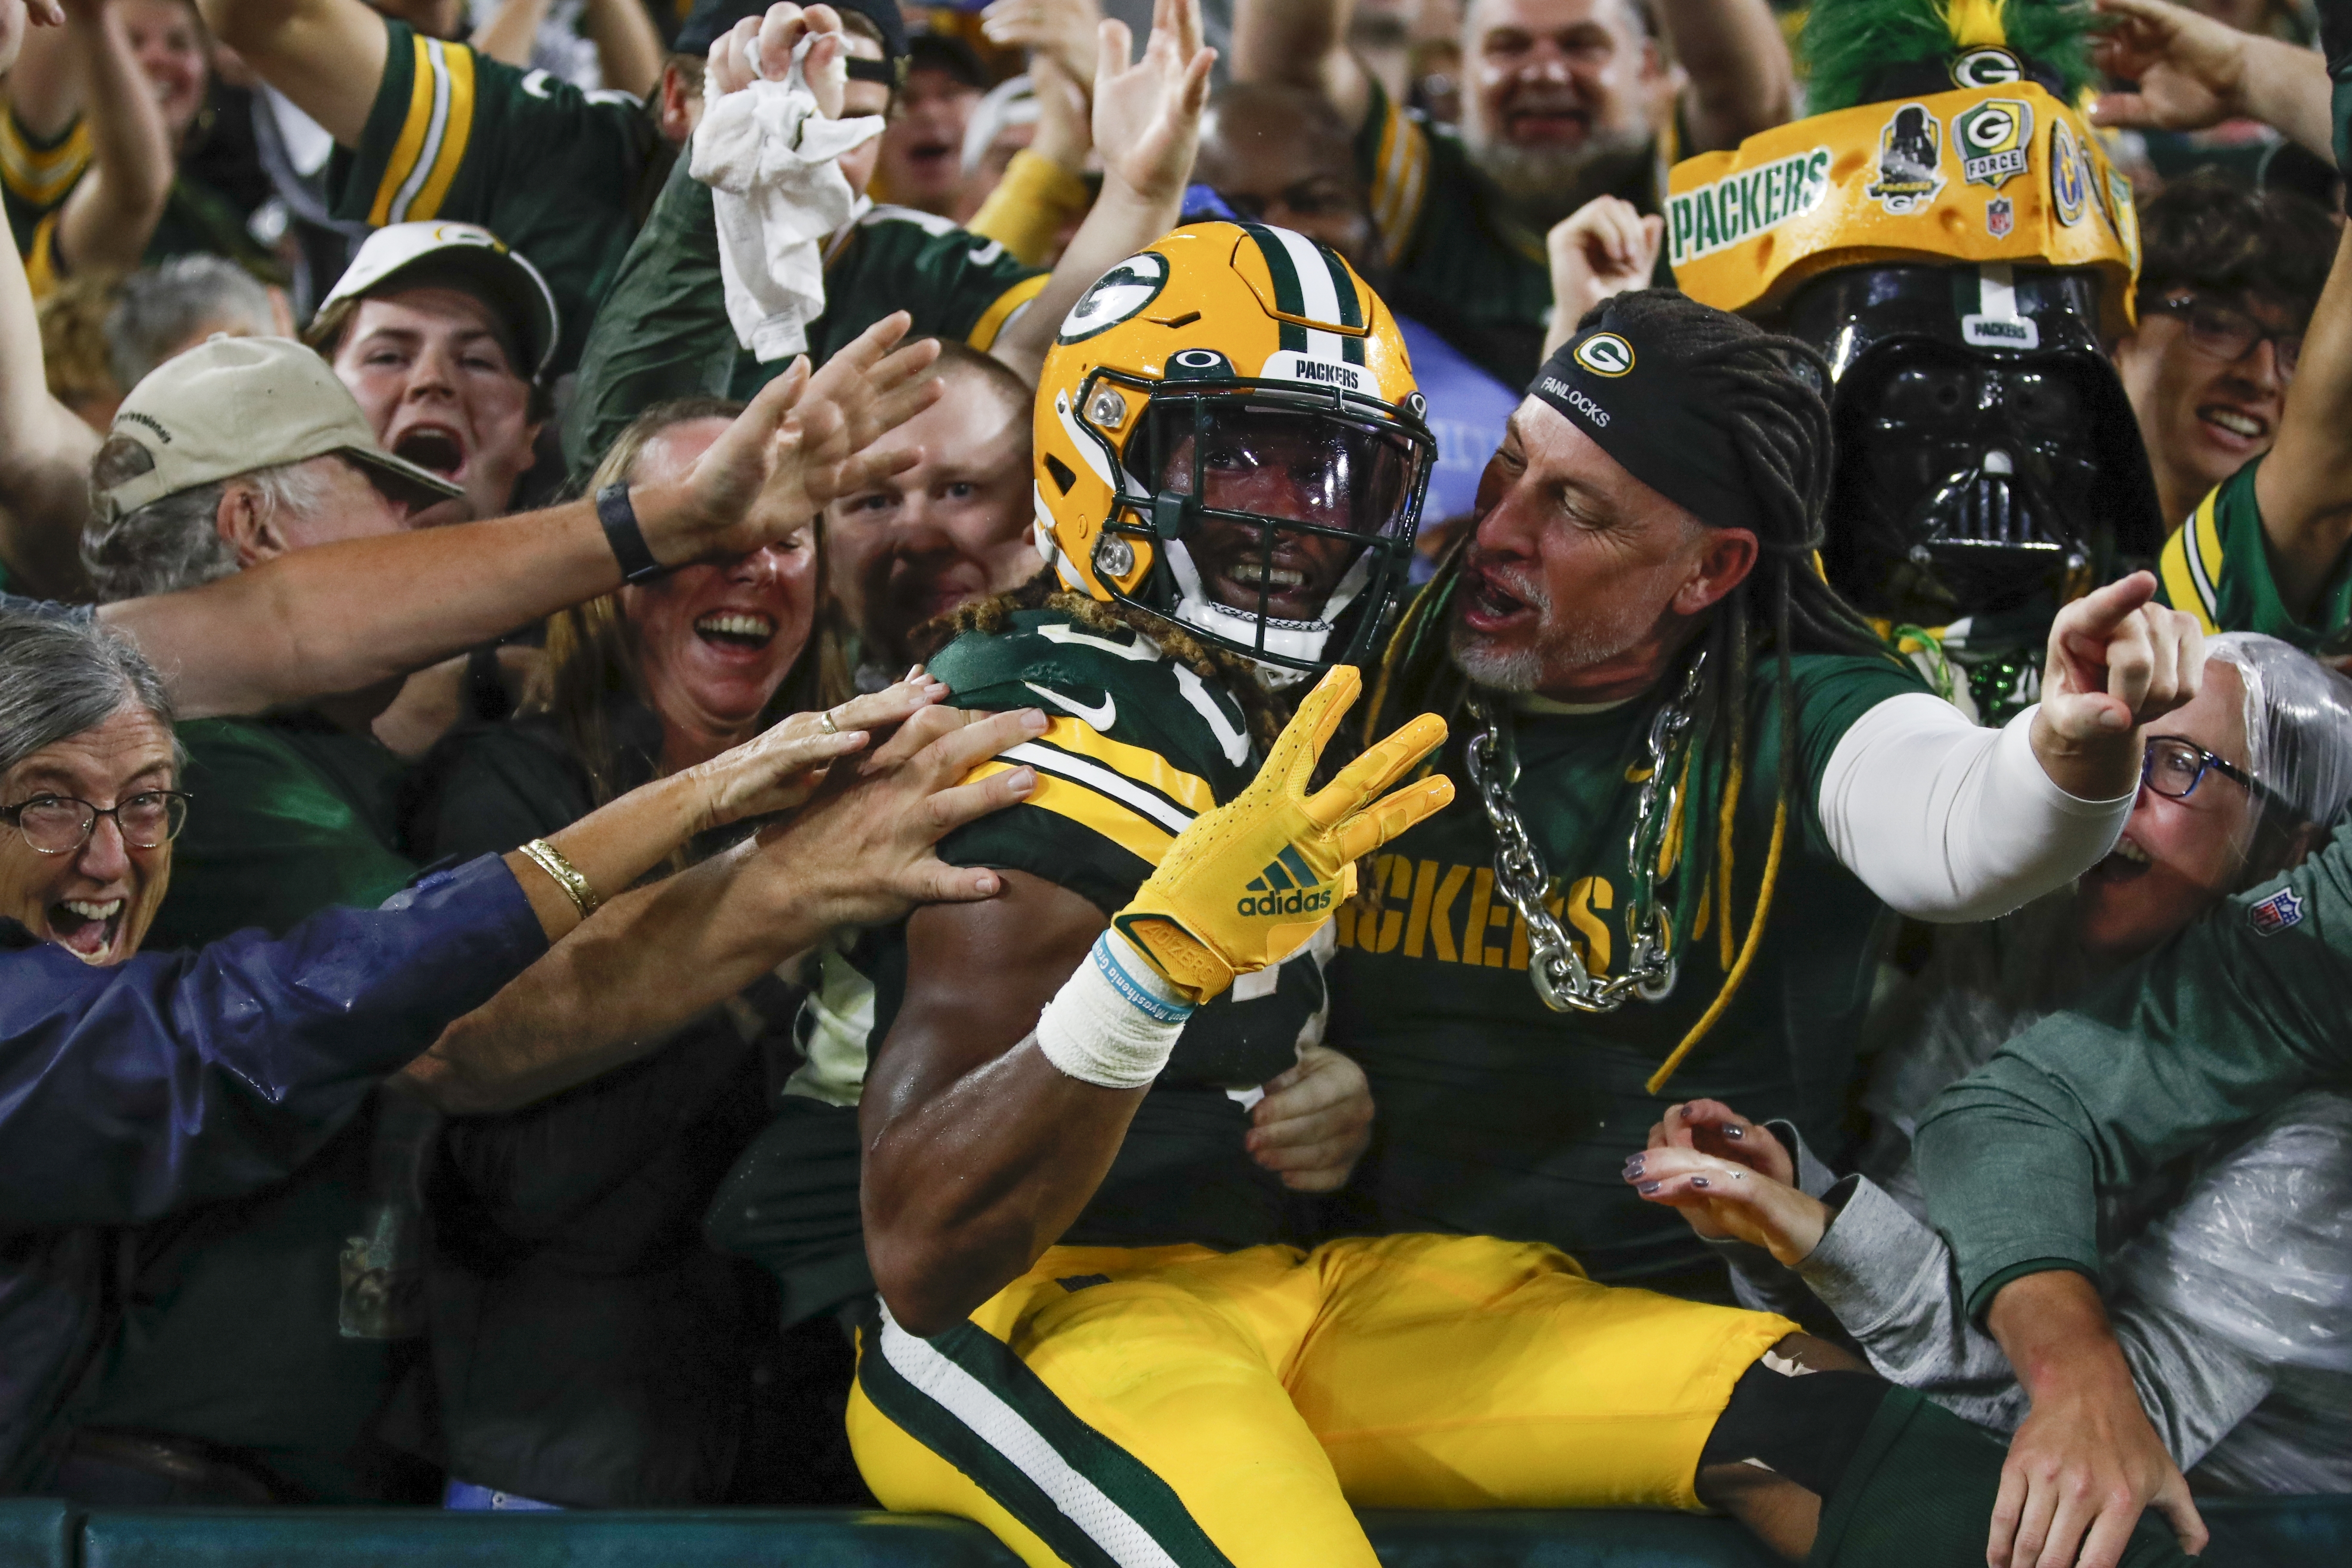 Packers to host 49ers on Saturday, Jan. 22 at 7:15 p.m.